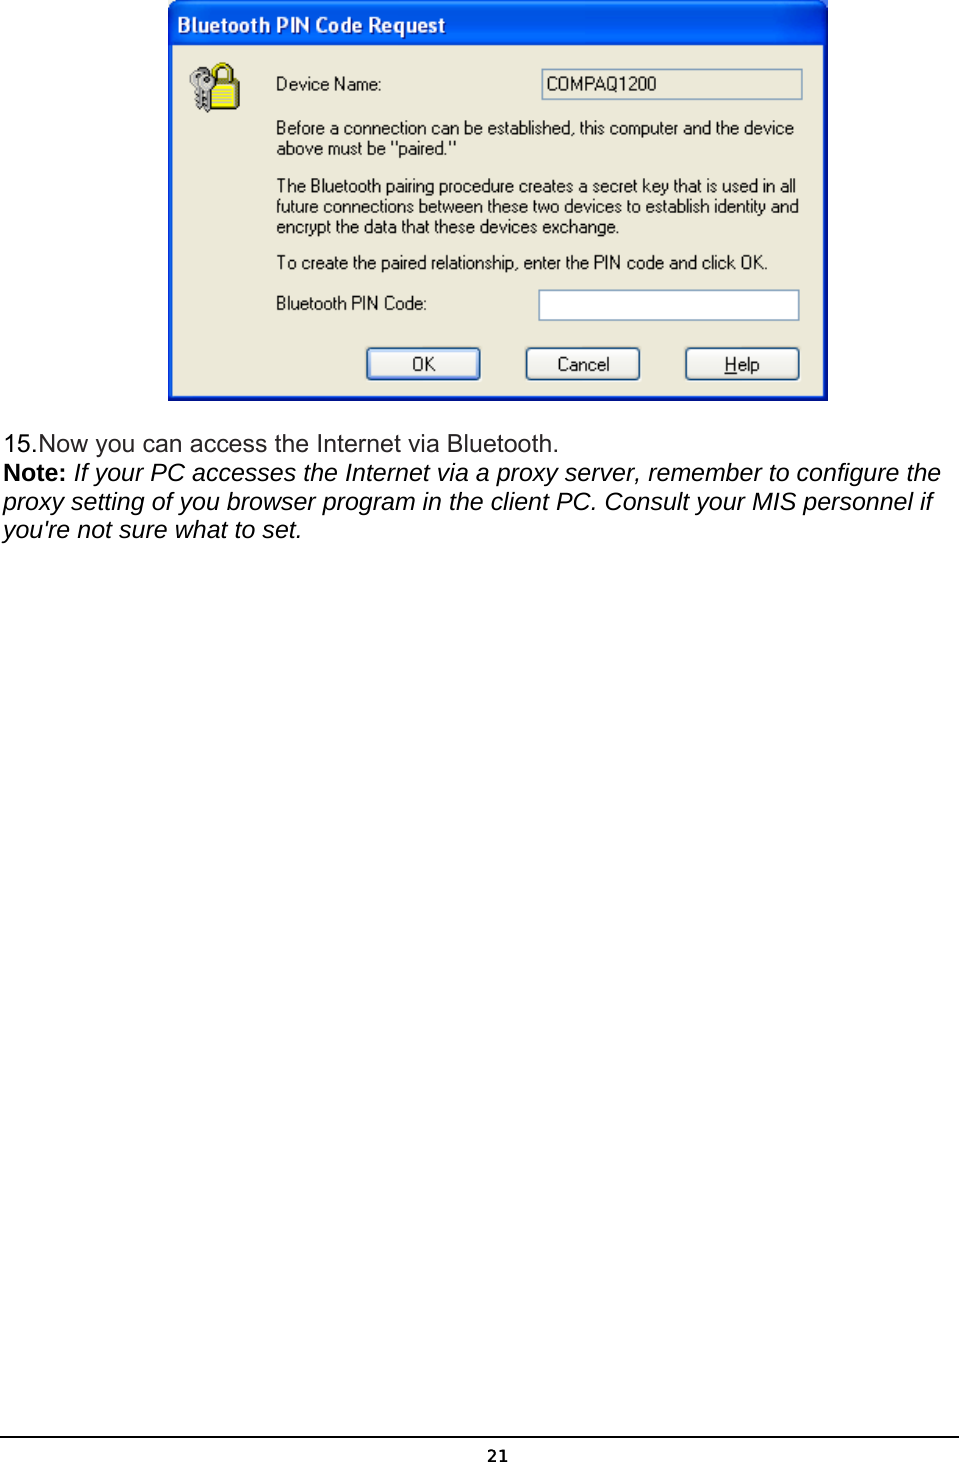   21 15. Now you can access the Internet via Bluetooth. Note: If your PC accesses the Internet via a proxy server, remember to configure the proxy setting of you browser program in the client PC. Consult your MIS personnel if you&apos;re not sure what to set. 